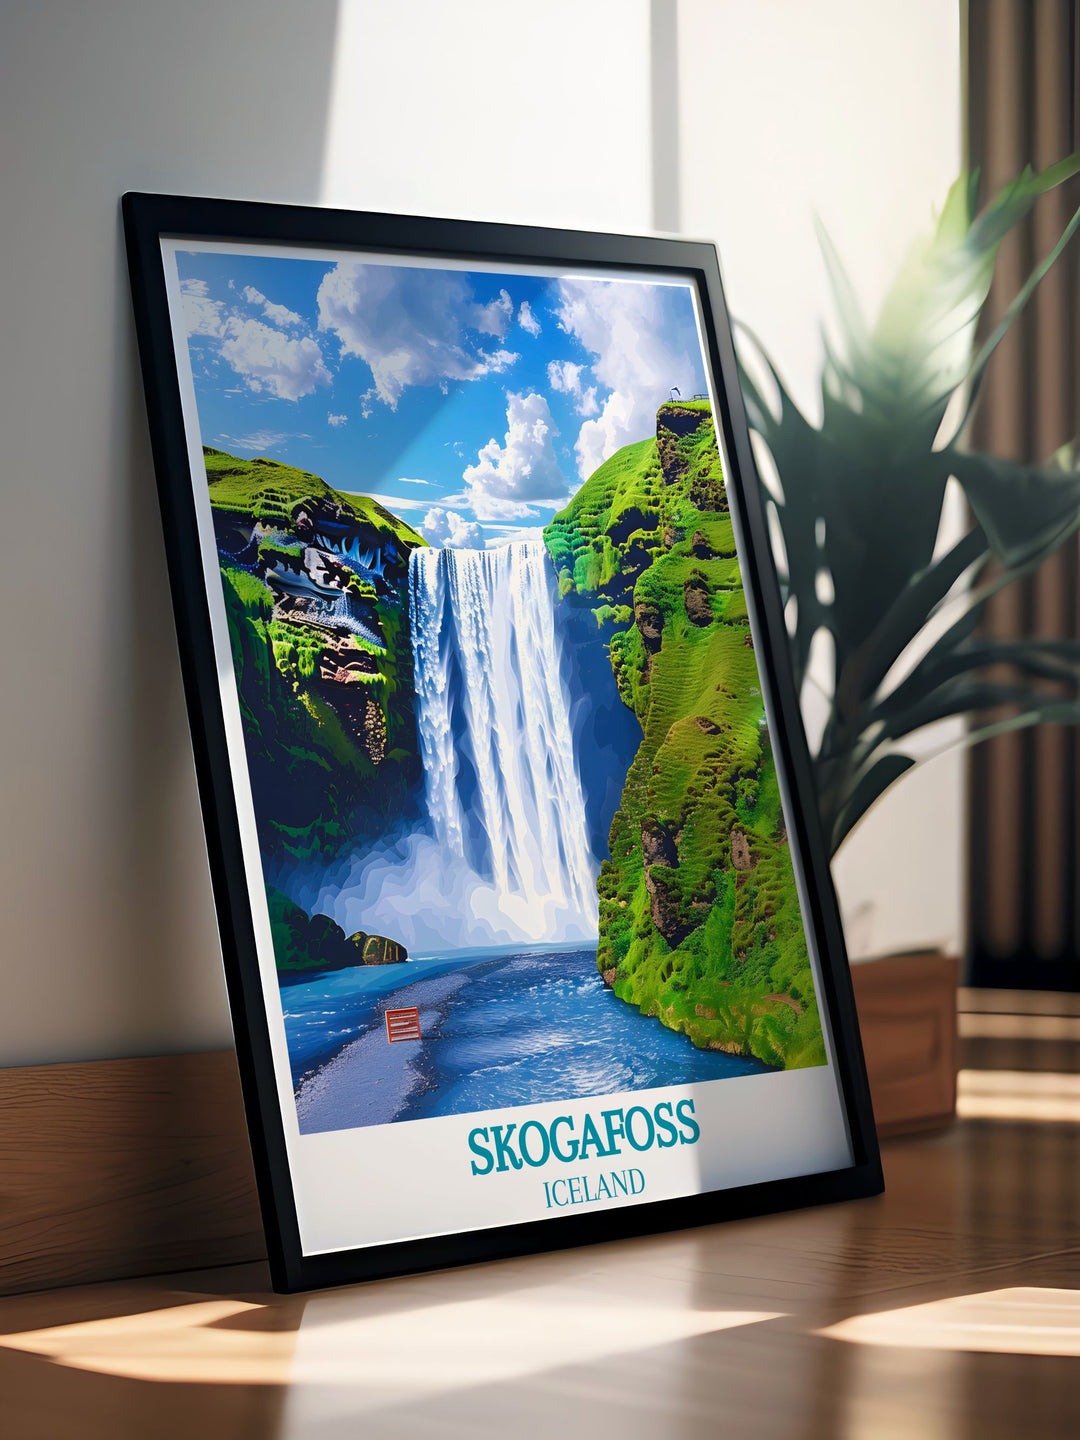 Embrace the magic of Skogafoss with this travel poster, depicting the powerful waterfall and the vibrant colors of the rainbow in its mist.